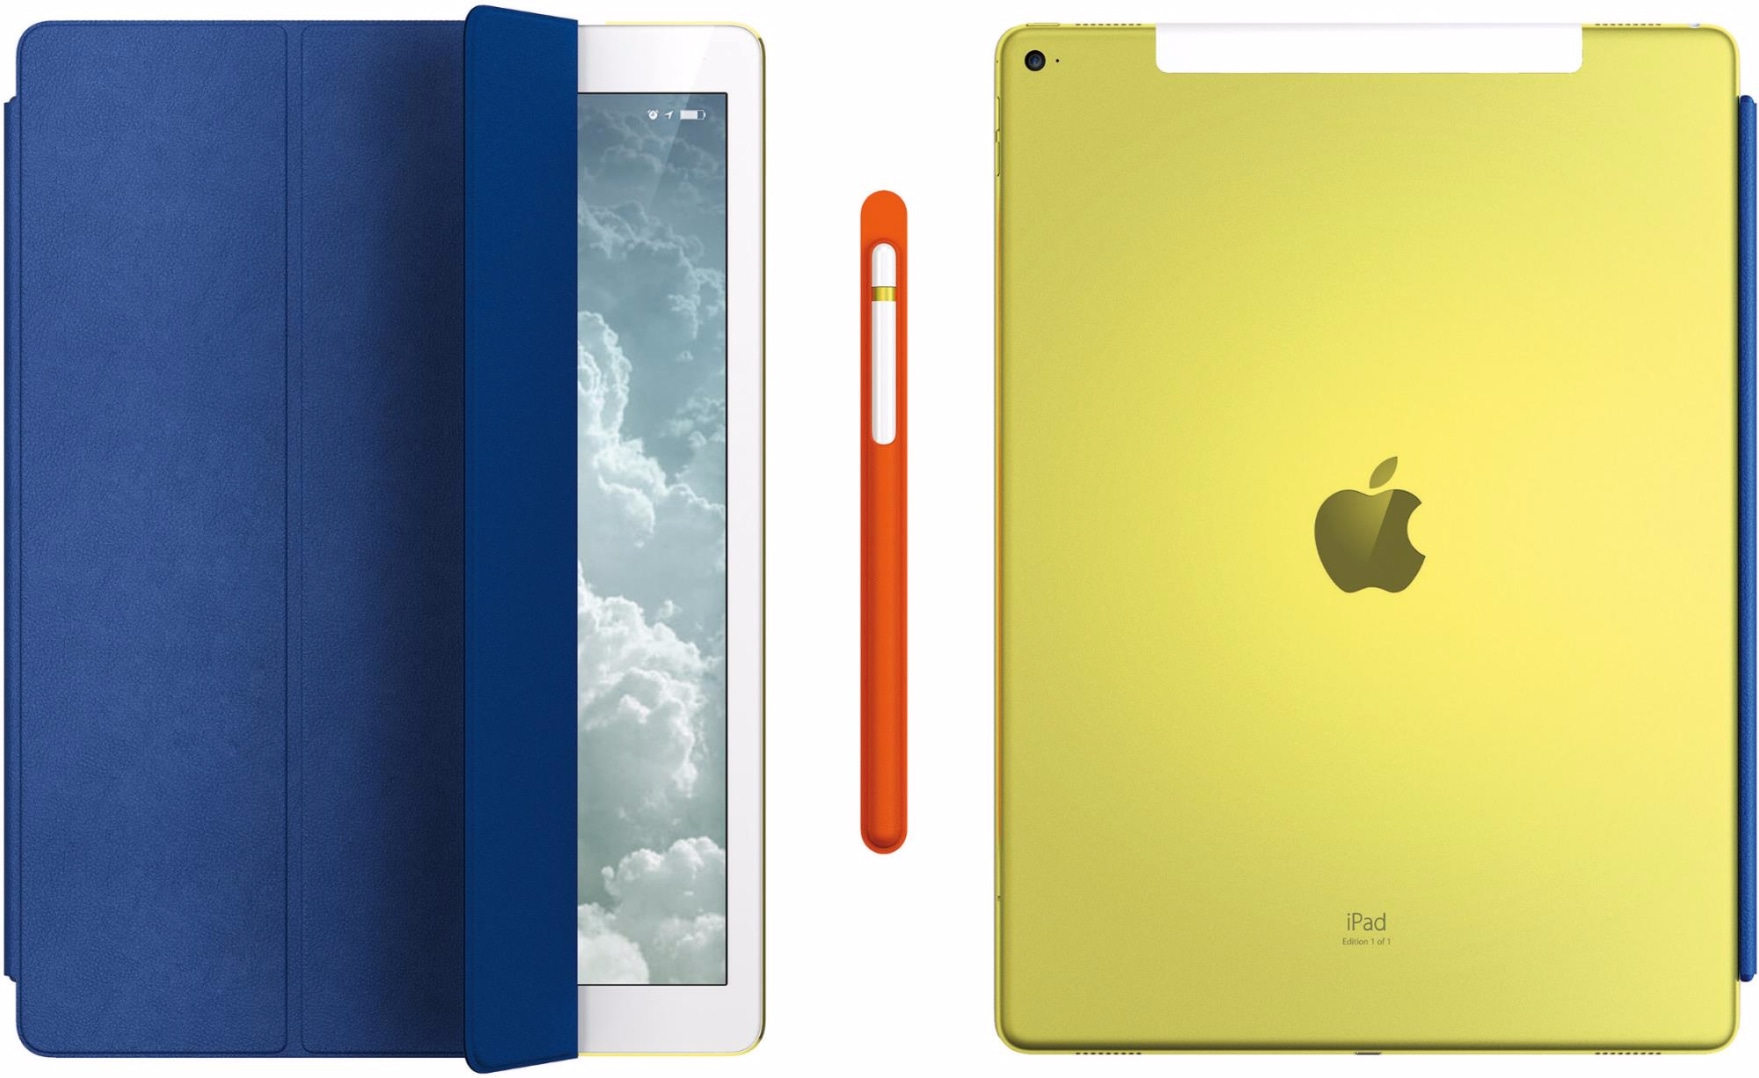 Jony Ive creates special version of iPad Pro with accessories for charity auction